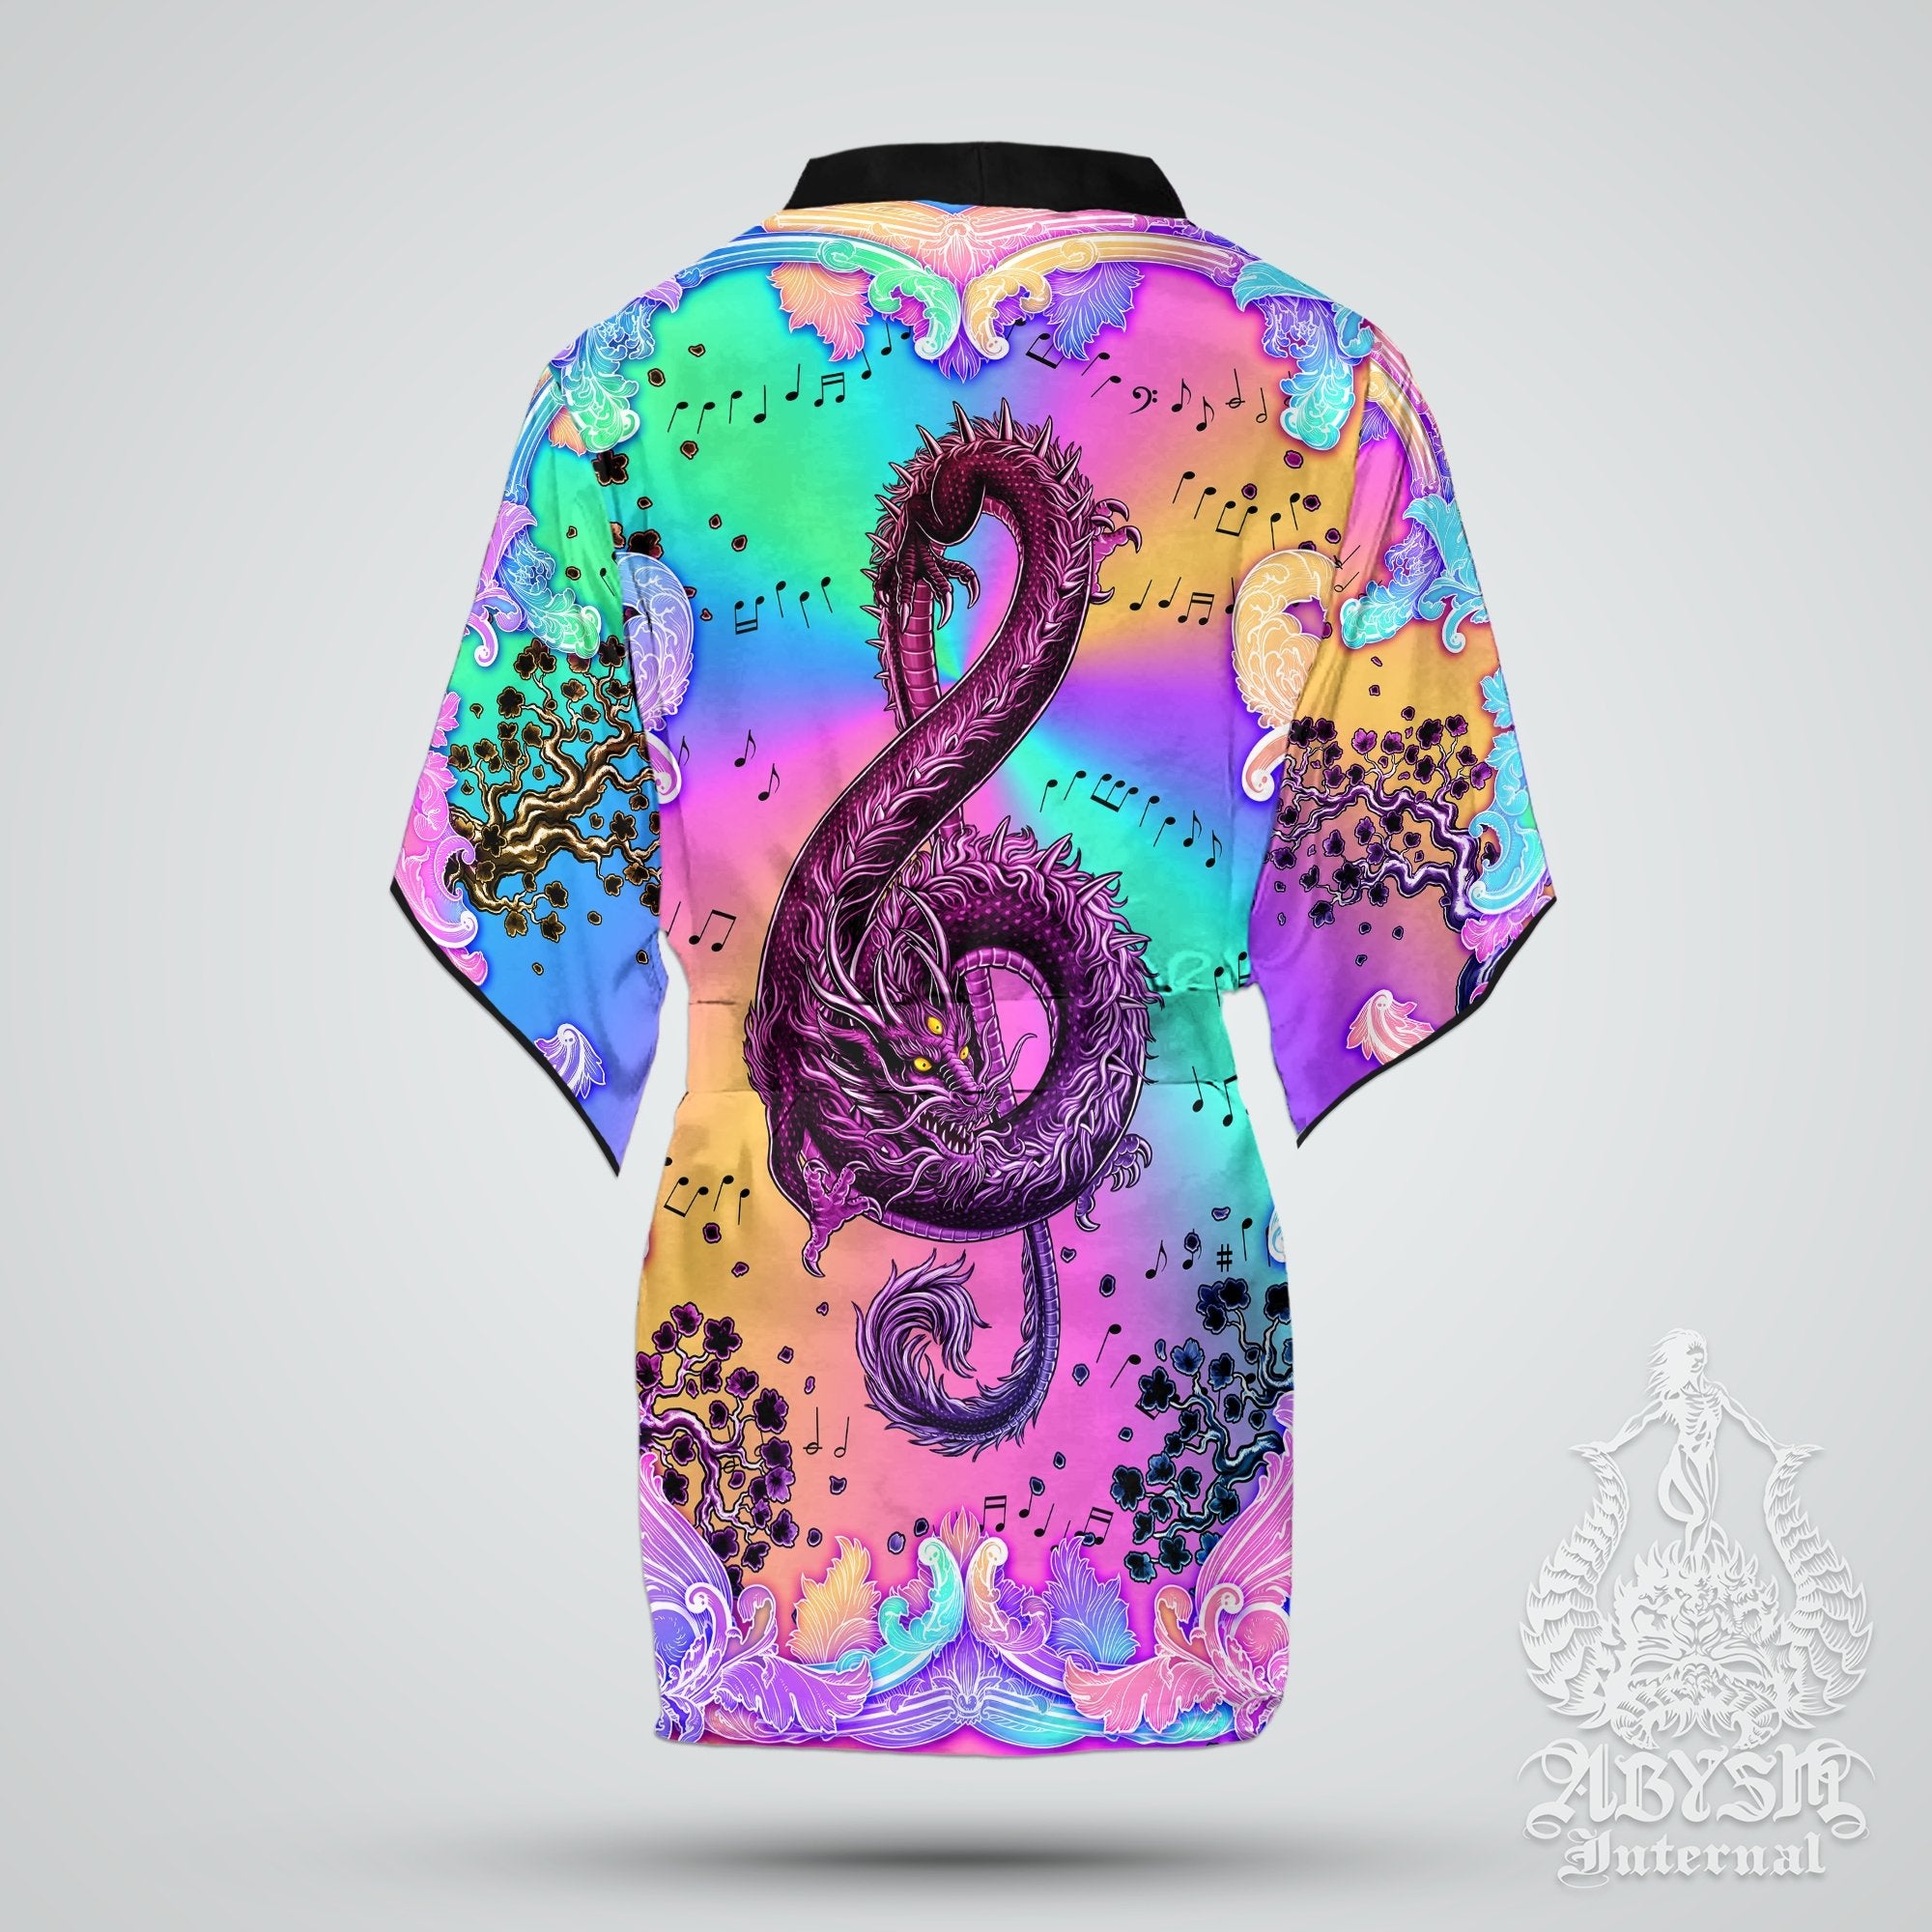 Music Cover Up, Beach Rave Outfit, Party Kimono, Summer Festival Robe, Aesthetic Indie and Alternative Clothing, Unisex - Dragon, Pastel Punk Black II - Abysm Internal